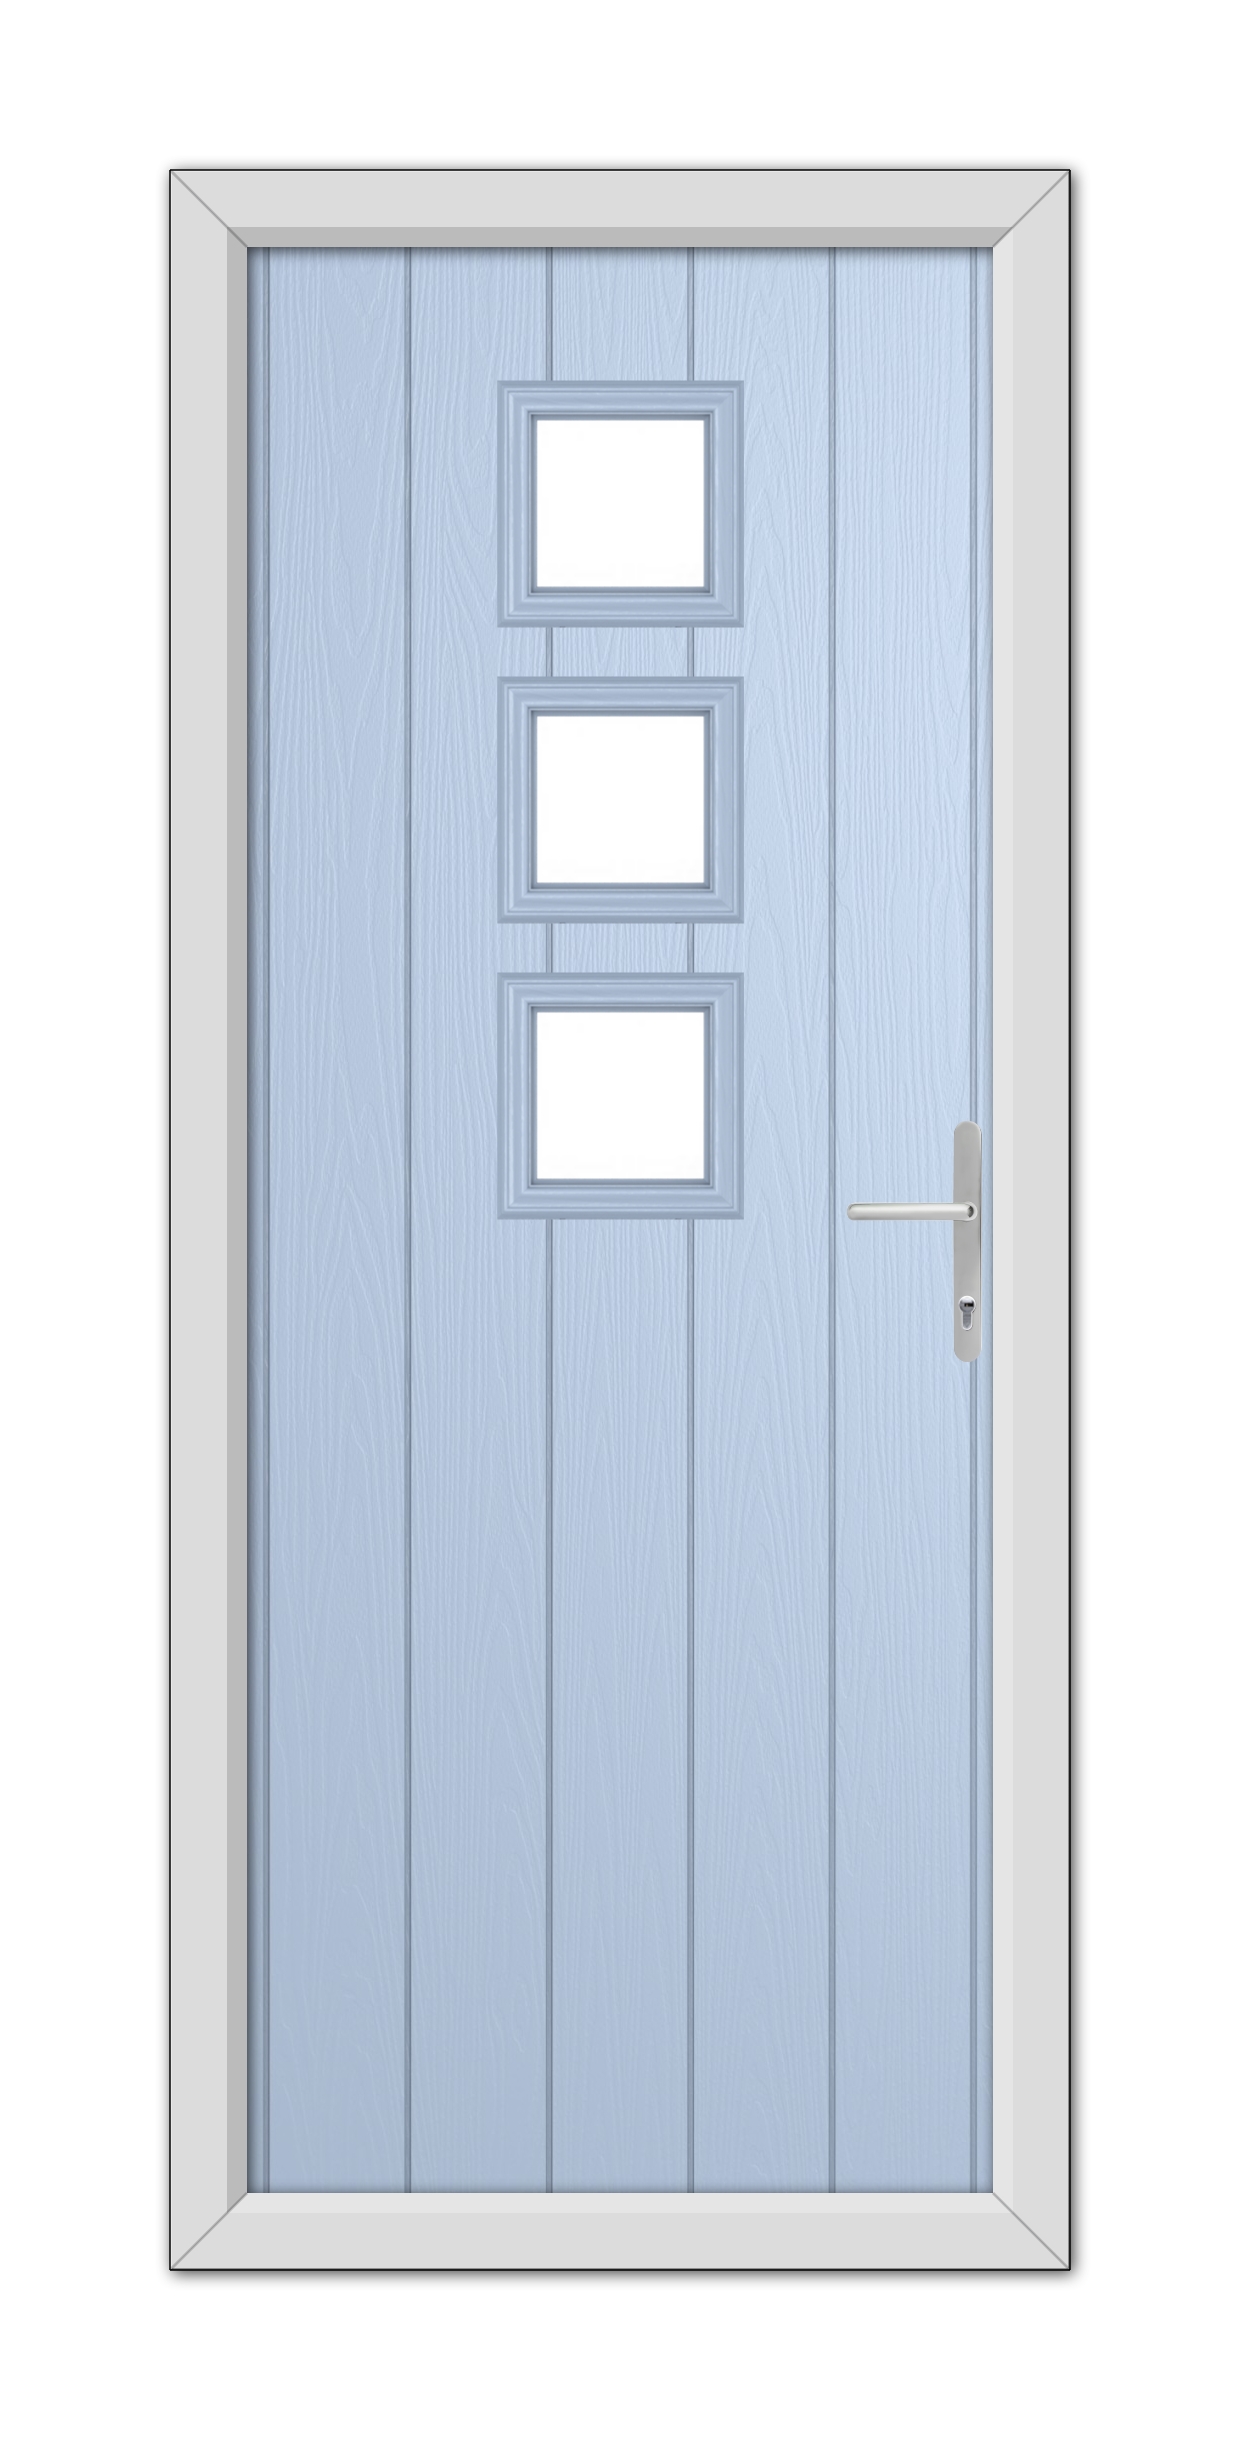 A closed Duck Egg Blue Montrose Composite Door featuring three square glass panels, set in a white frame with a metallic handle on the right side.